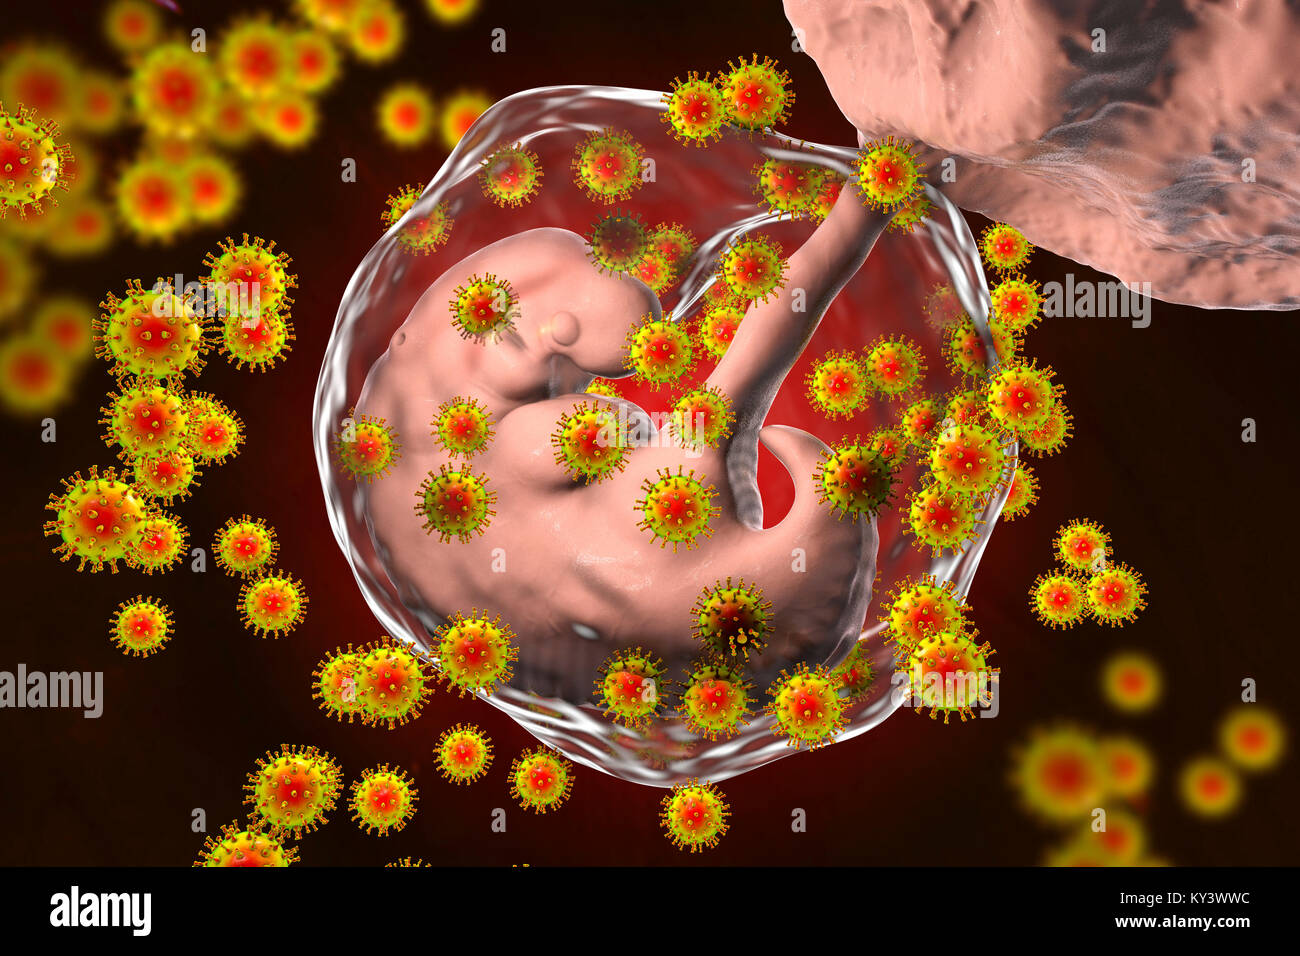 Human immunodeficiency viruses (HIV) infecting human embryo, conceptual illustration. The embryo is 4 weeks old. Stock Photo